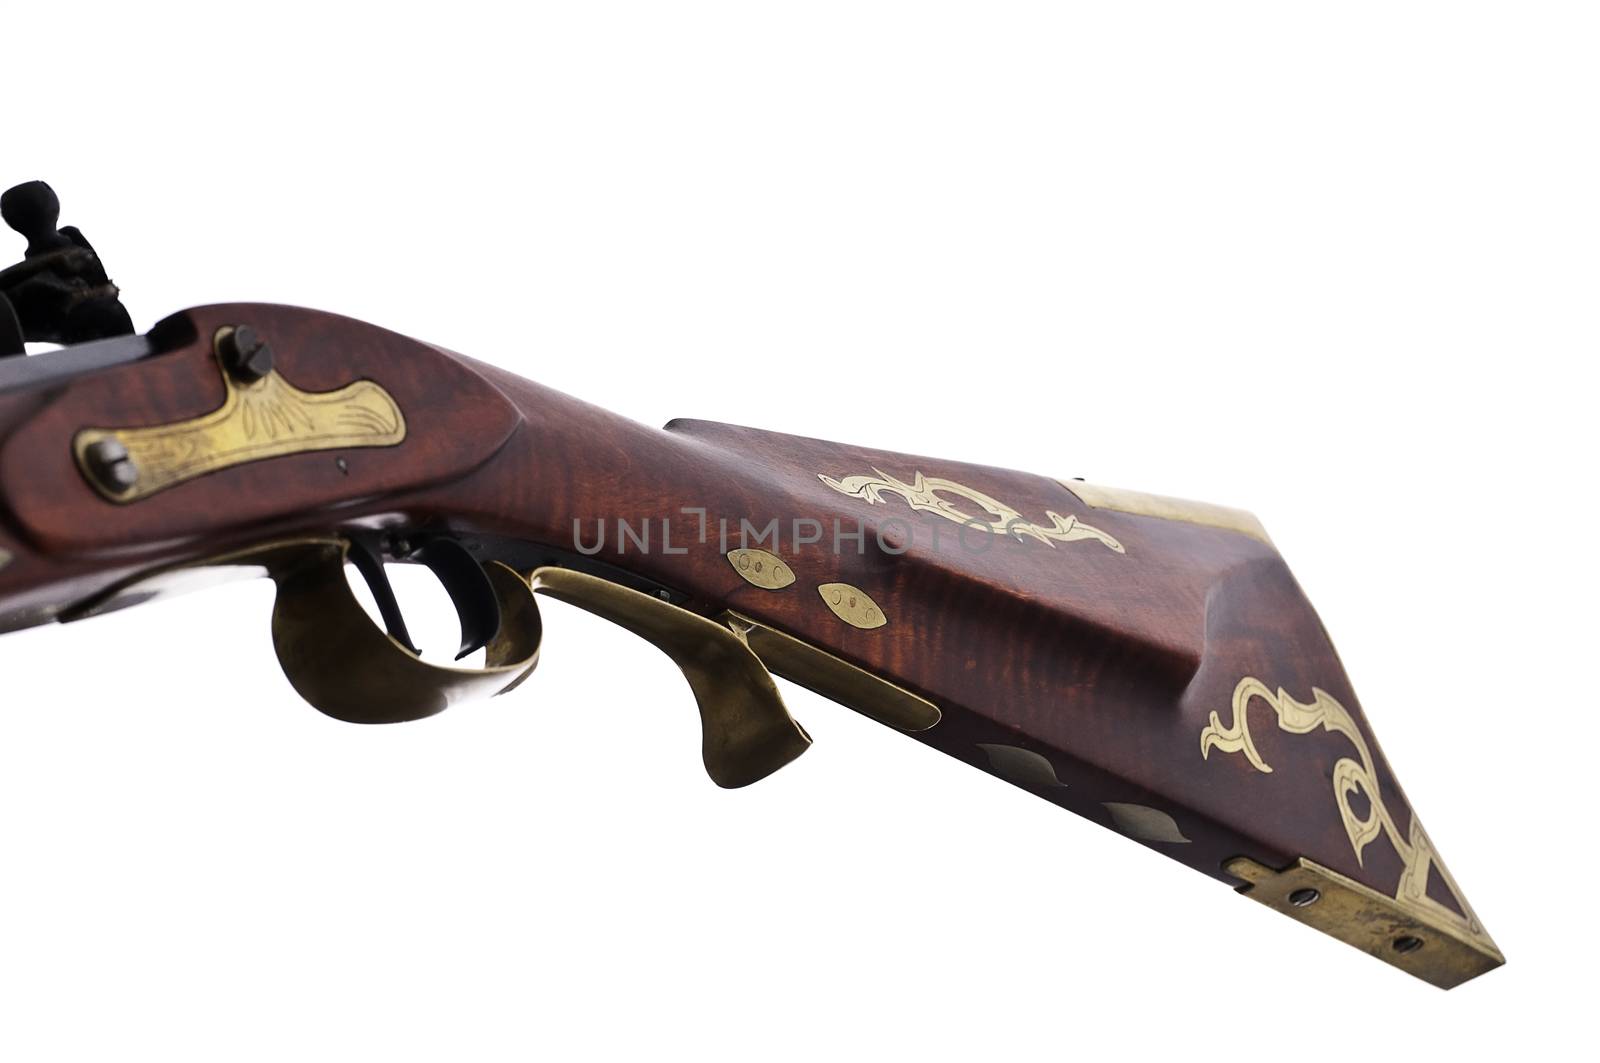 Close up view of a flint lock rifle and the brass inlays and engravings on the stock.